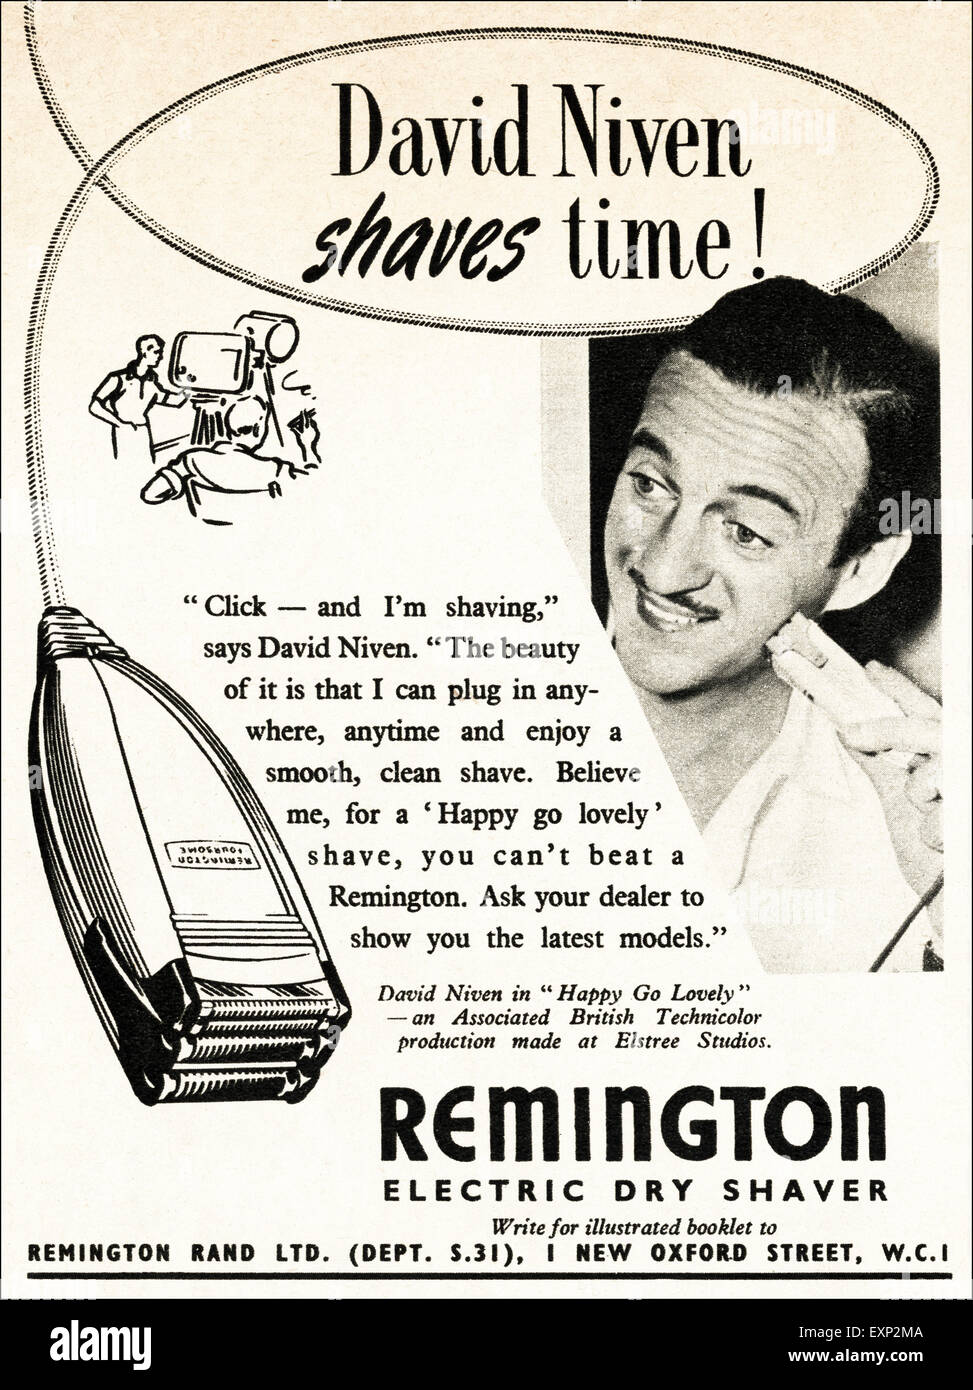 and Alamy hi-res photography images shaver Remington stock -